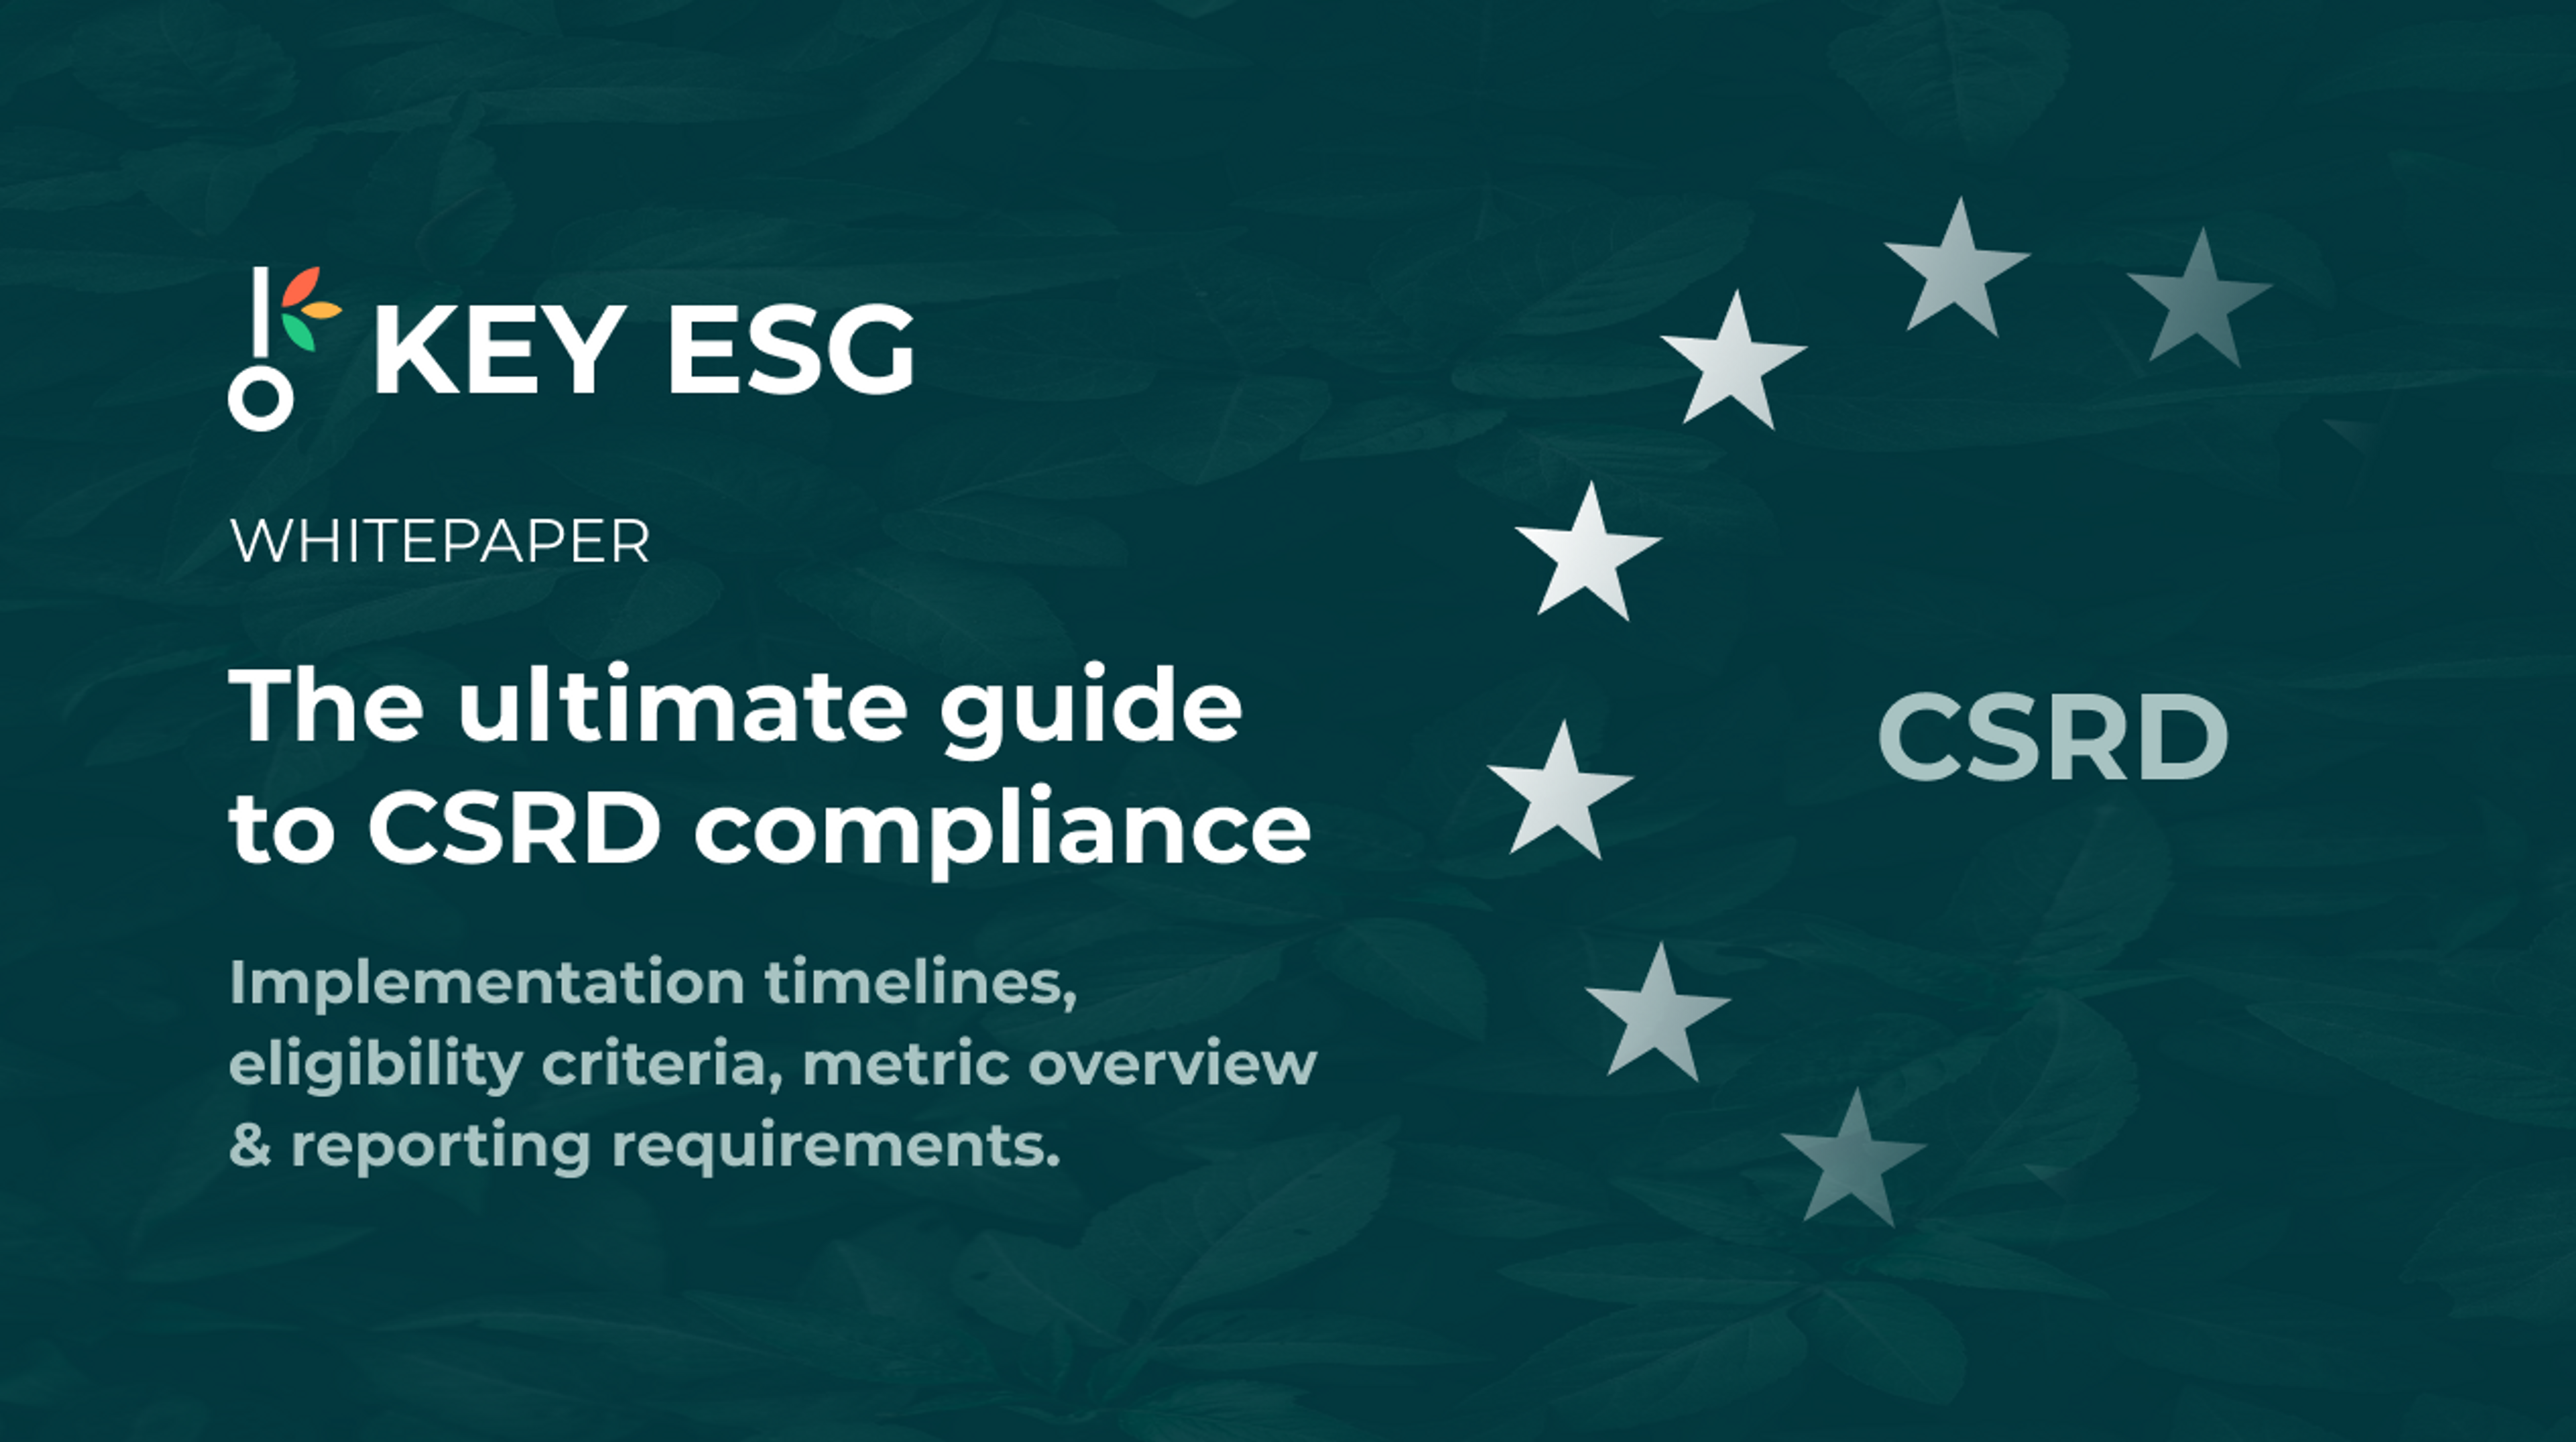 The ultimate guide to CSRD compliance